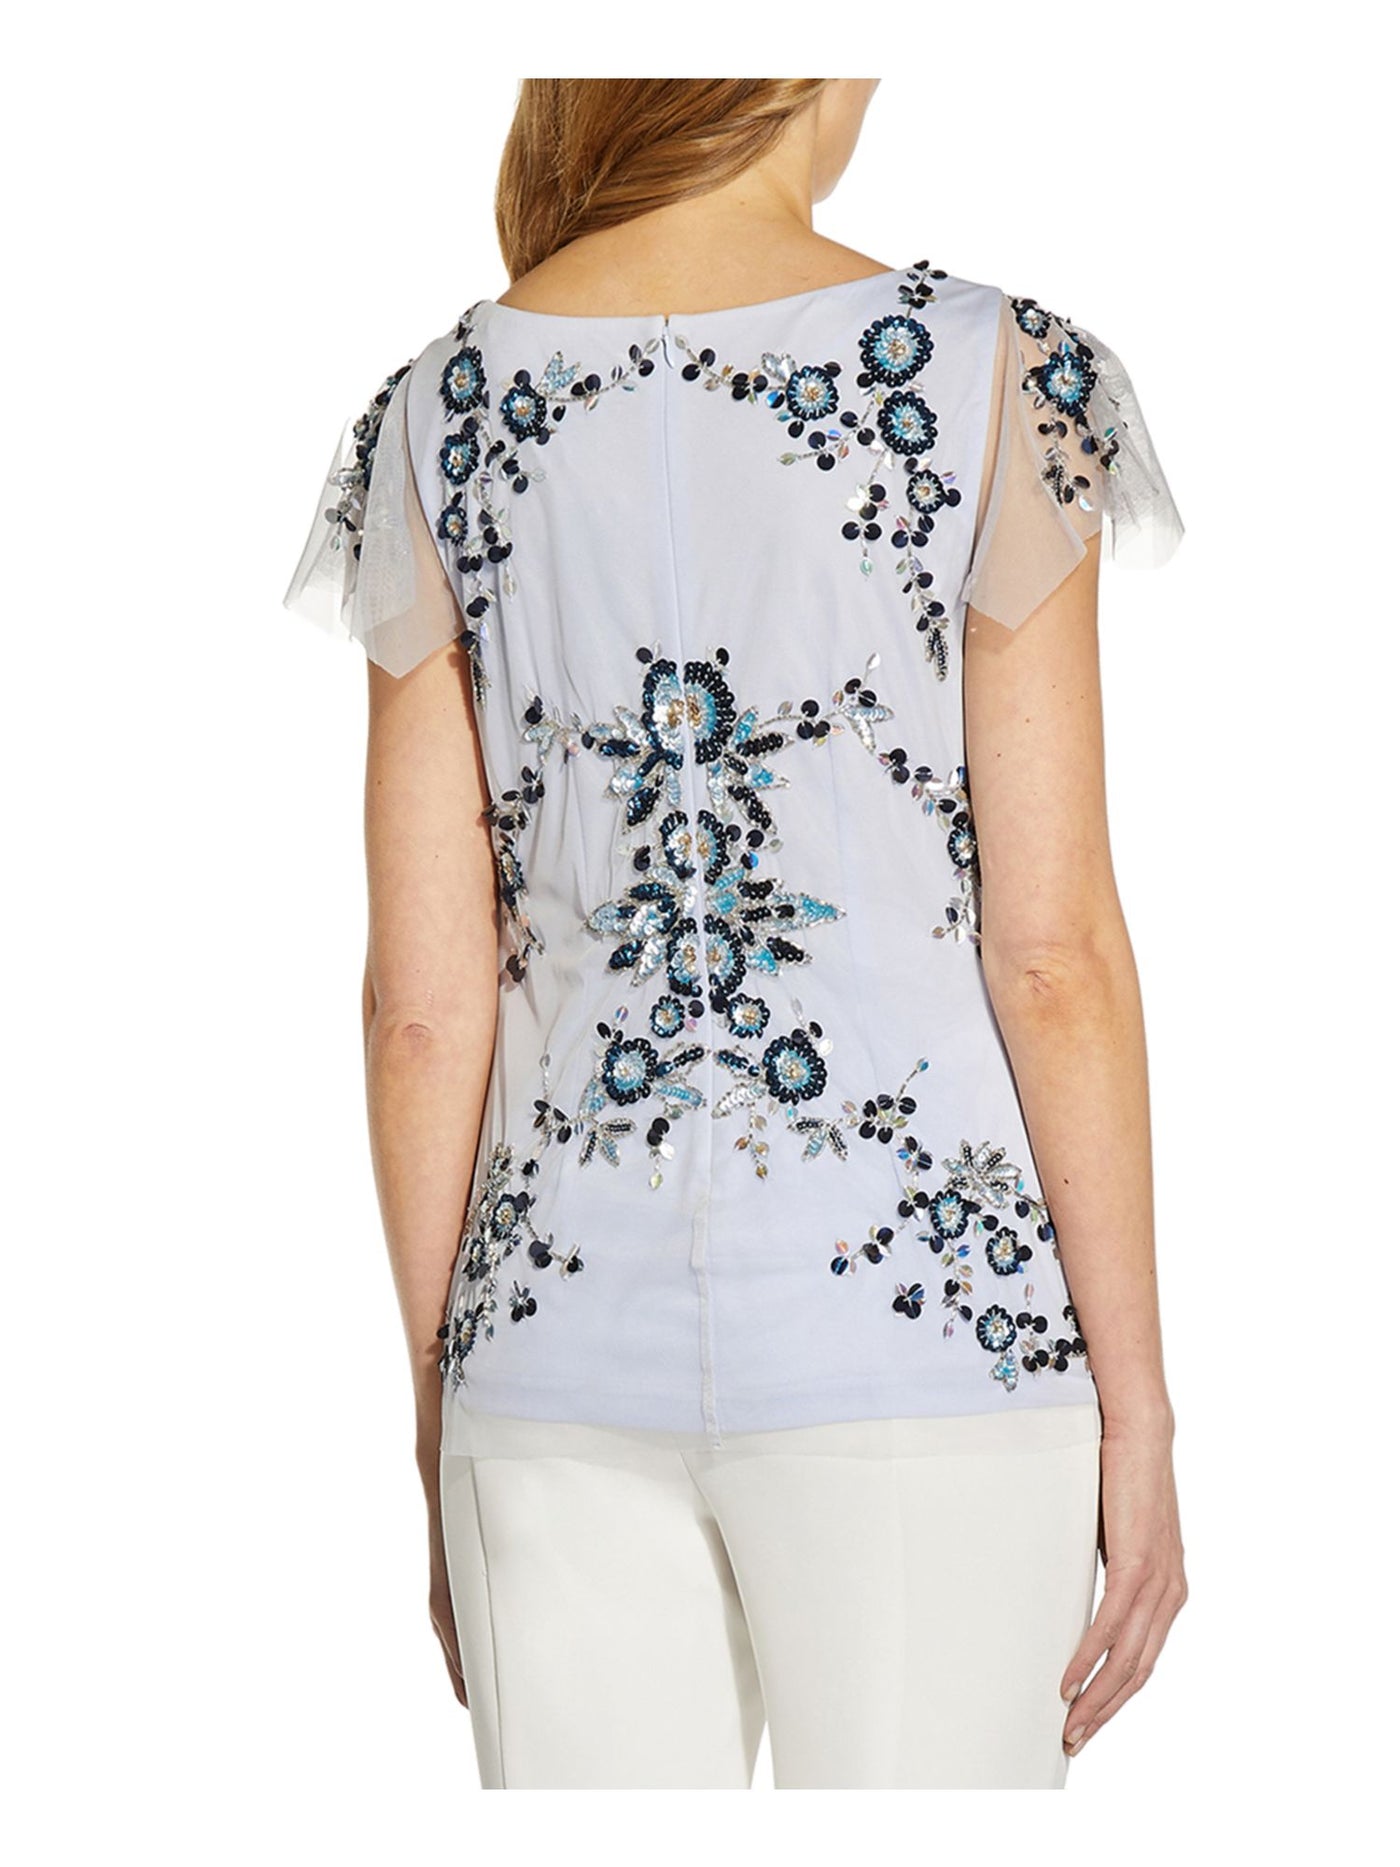 ADRIANNA PAPELL Womens Light Blue Embellished Sequined Zippered Lined Mesh Floral Flutter Sleeve V Neck Wear To Work Top Juniors 2